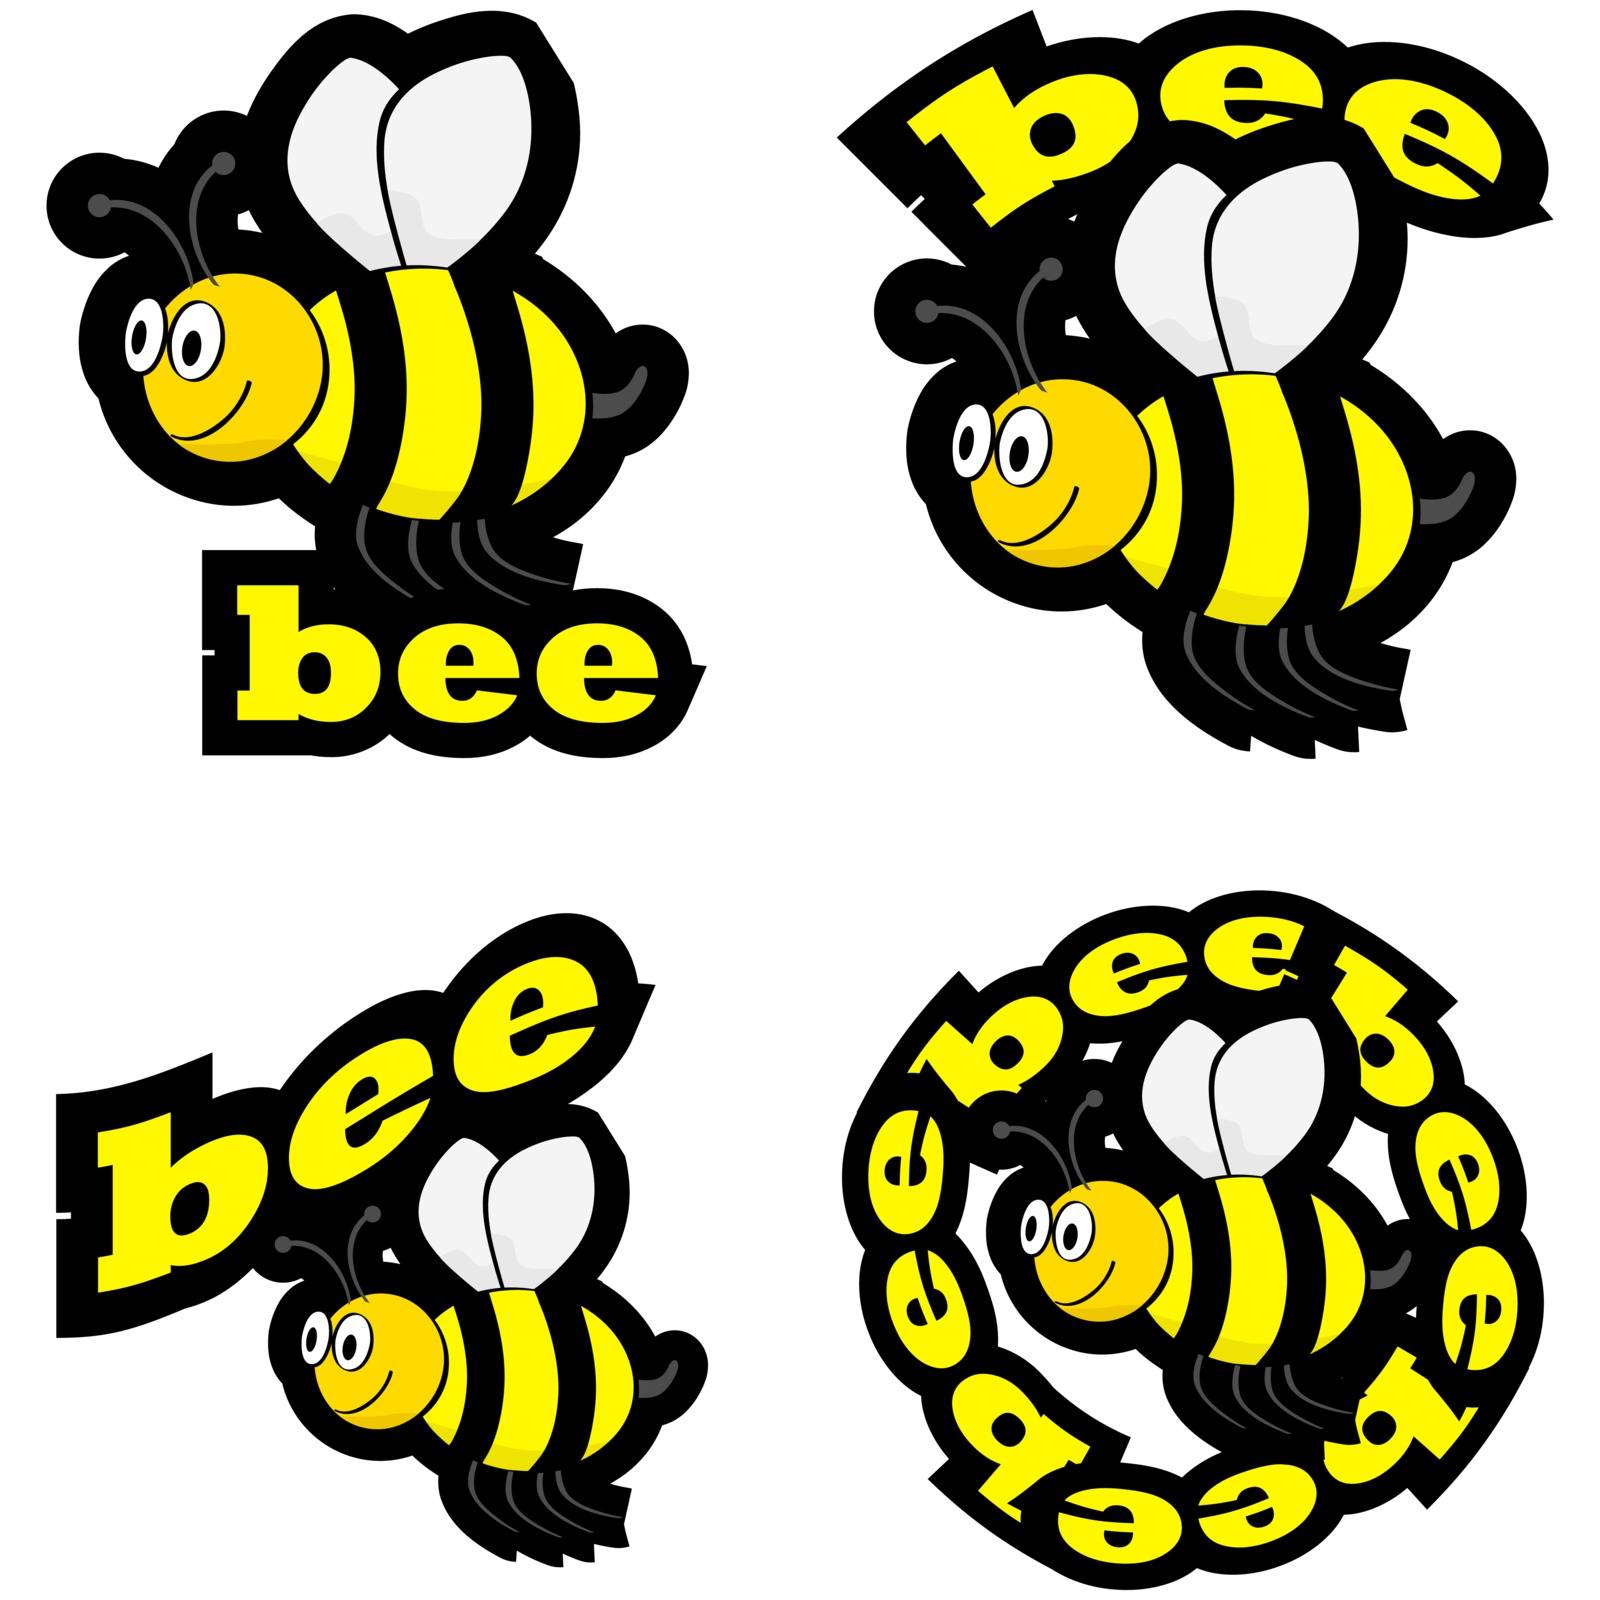 Bee icons by bruno1998